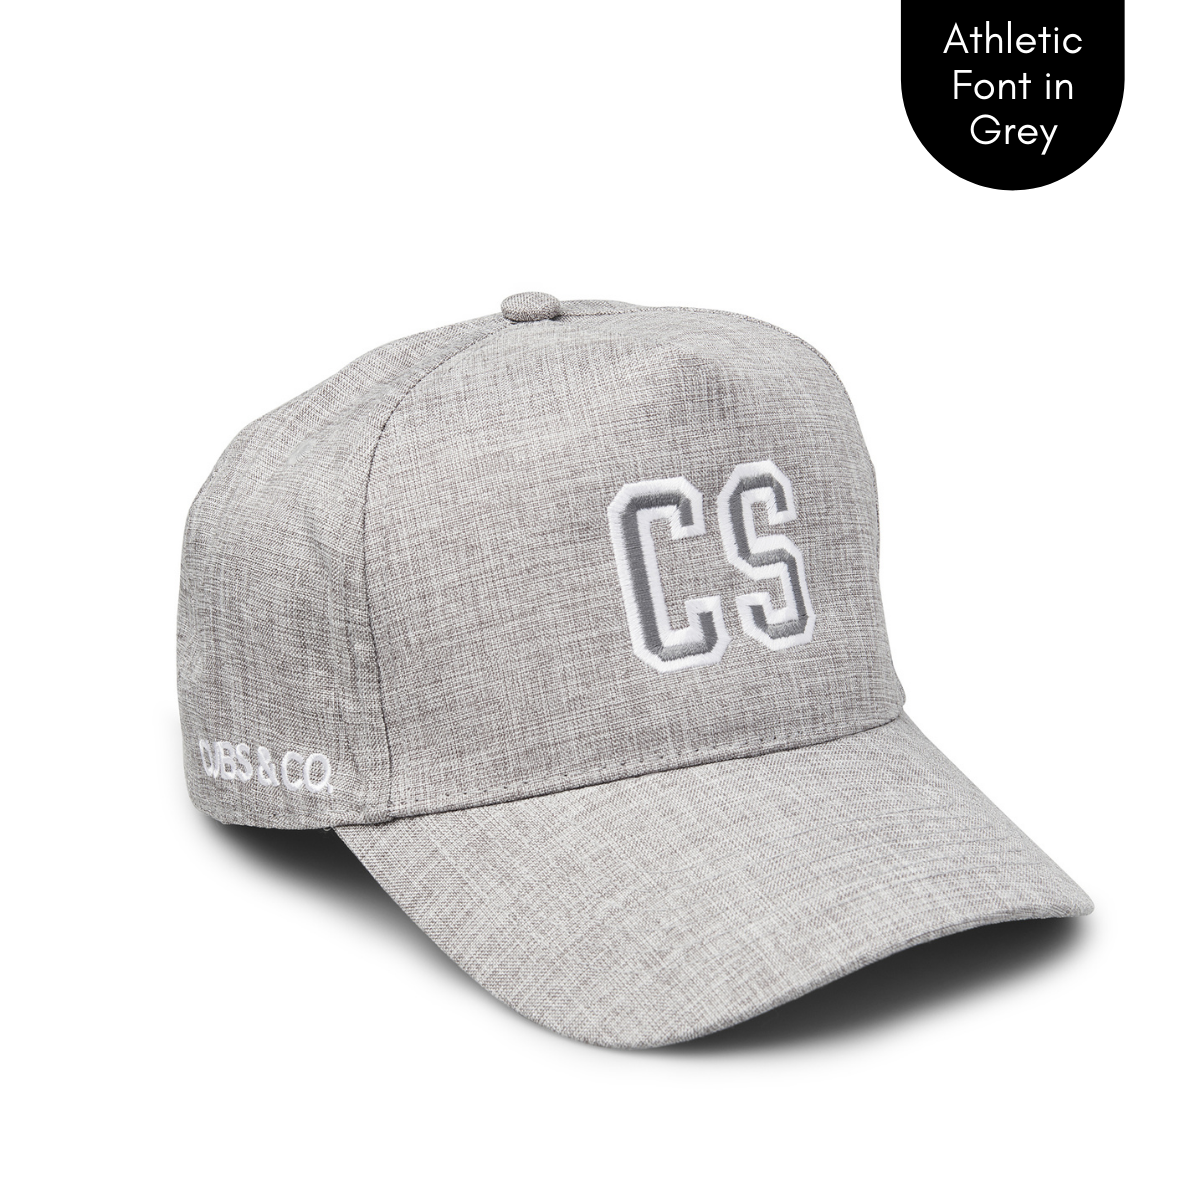 Cubs & Co - PERSONALISED GREY W/ INITIALS | ATHLETIC GREY FONT